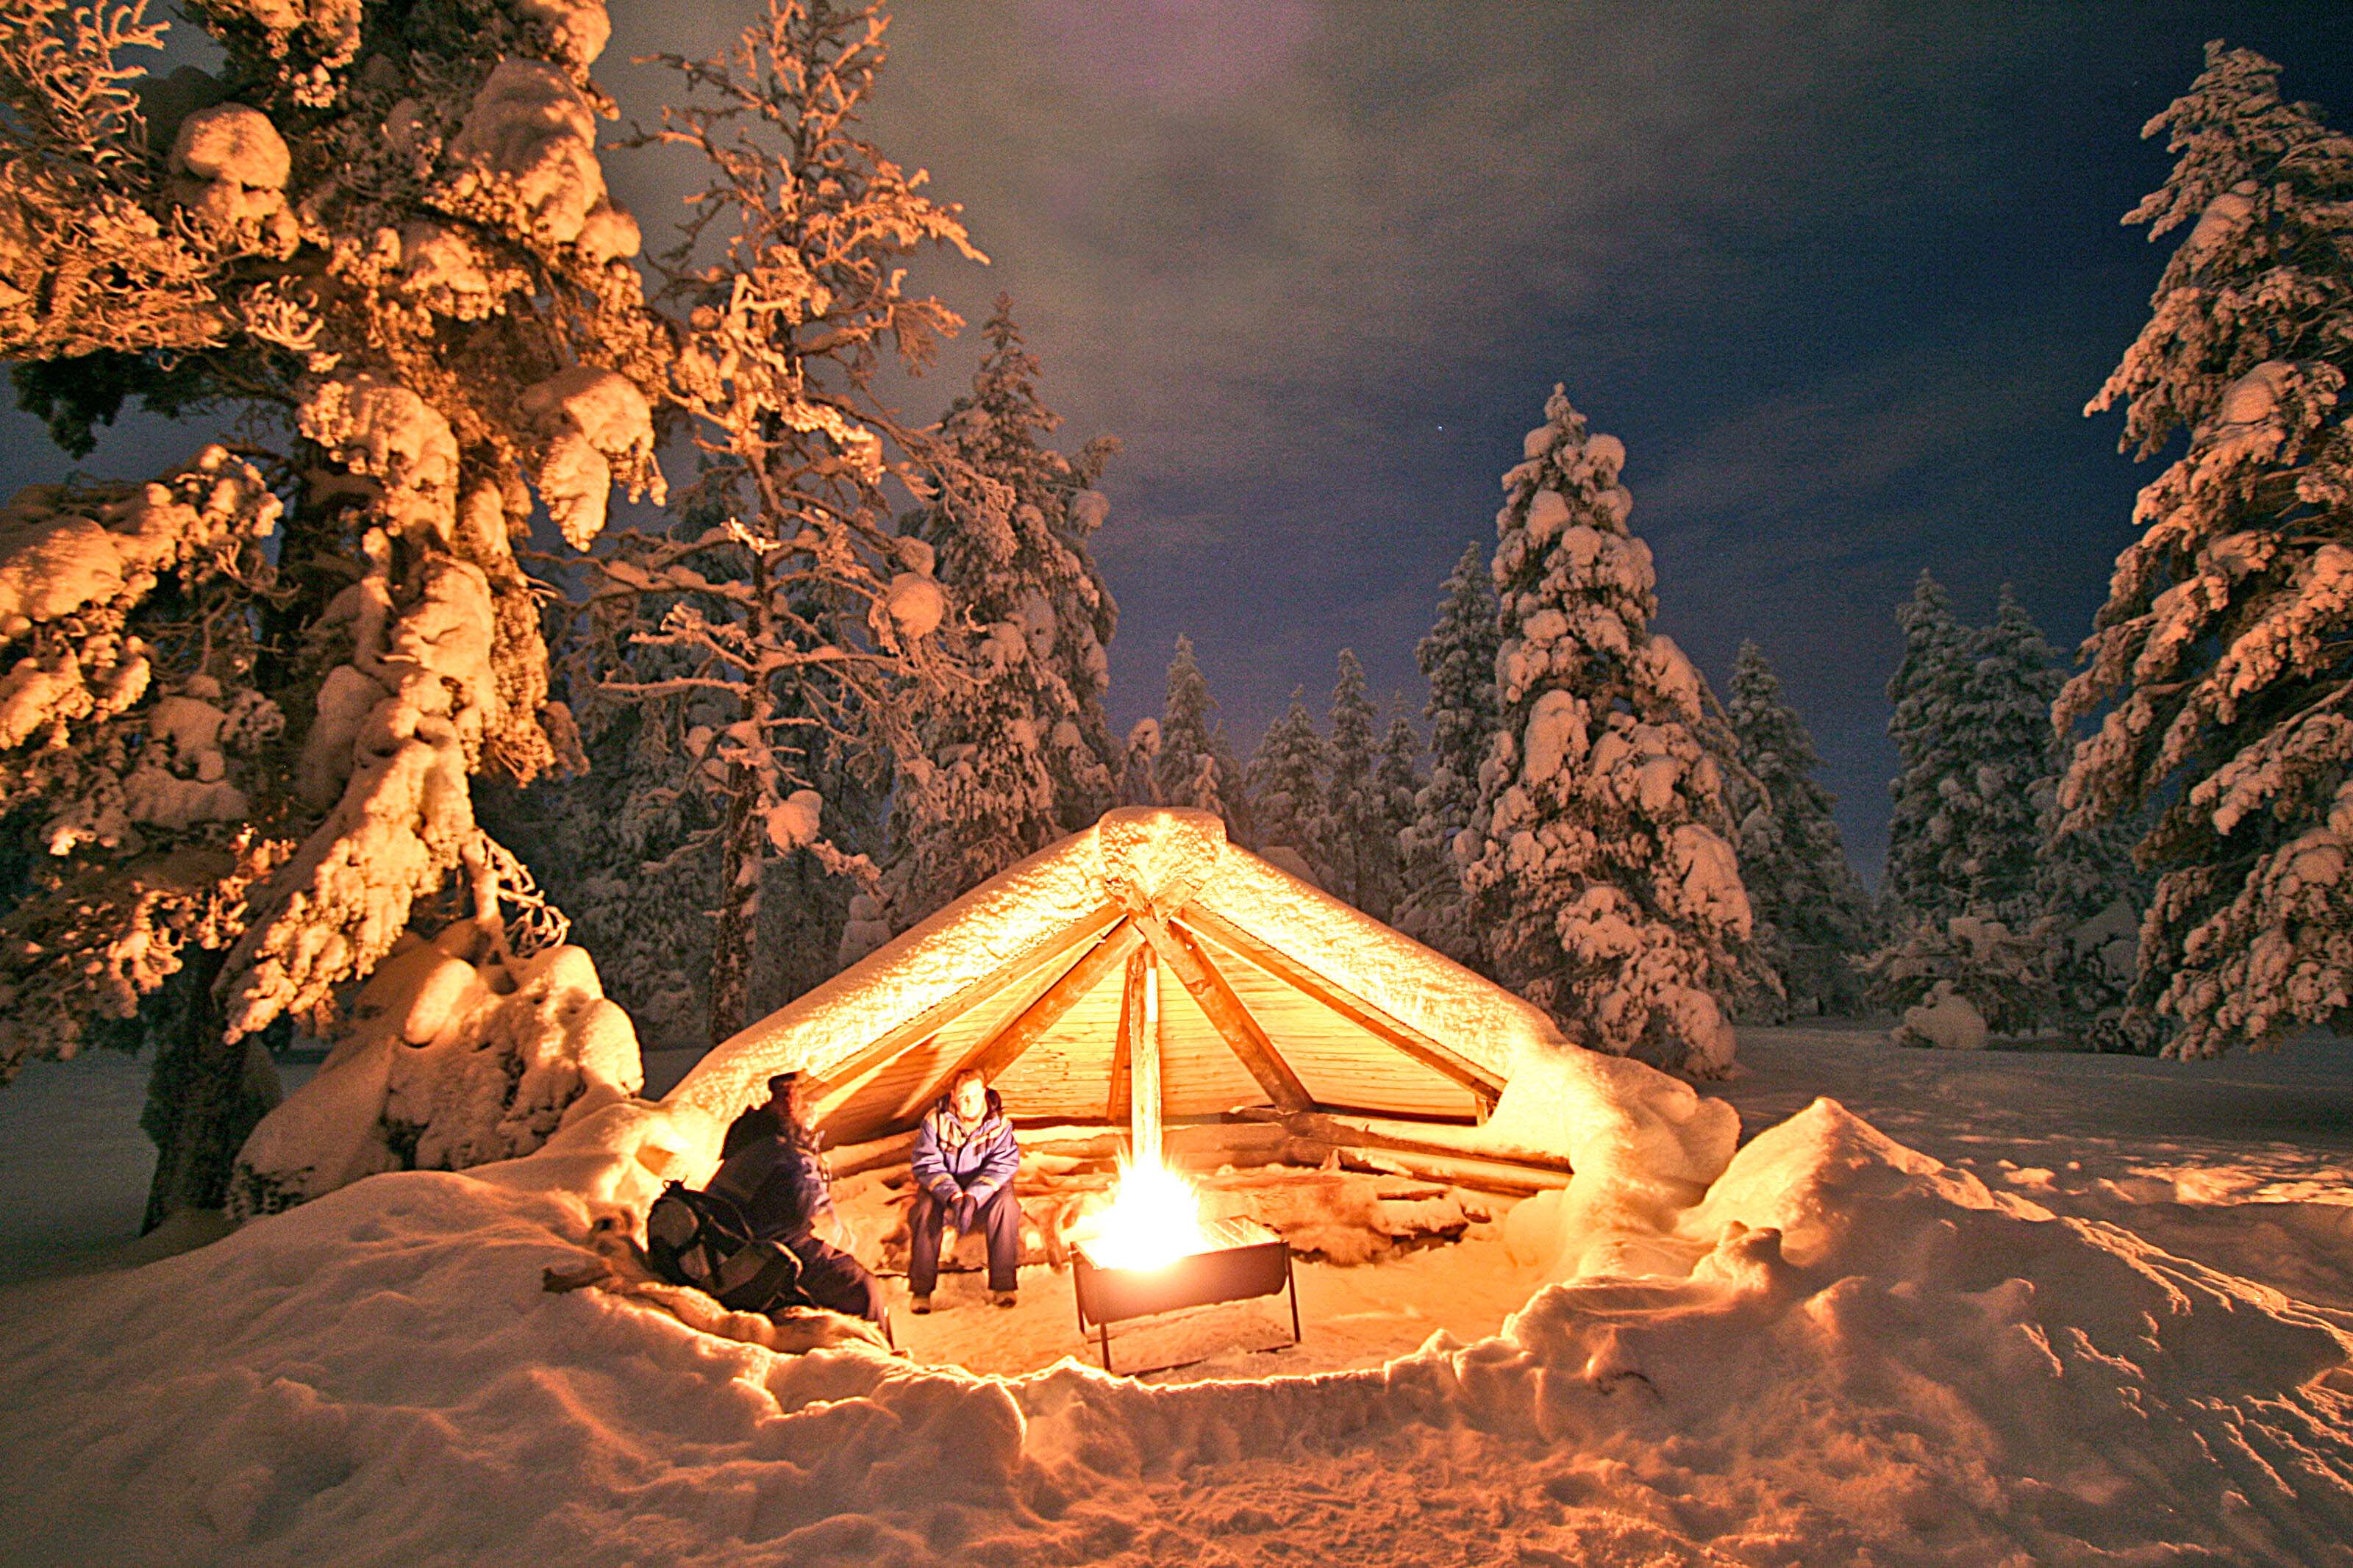 people warming up in a snowy camp